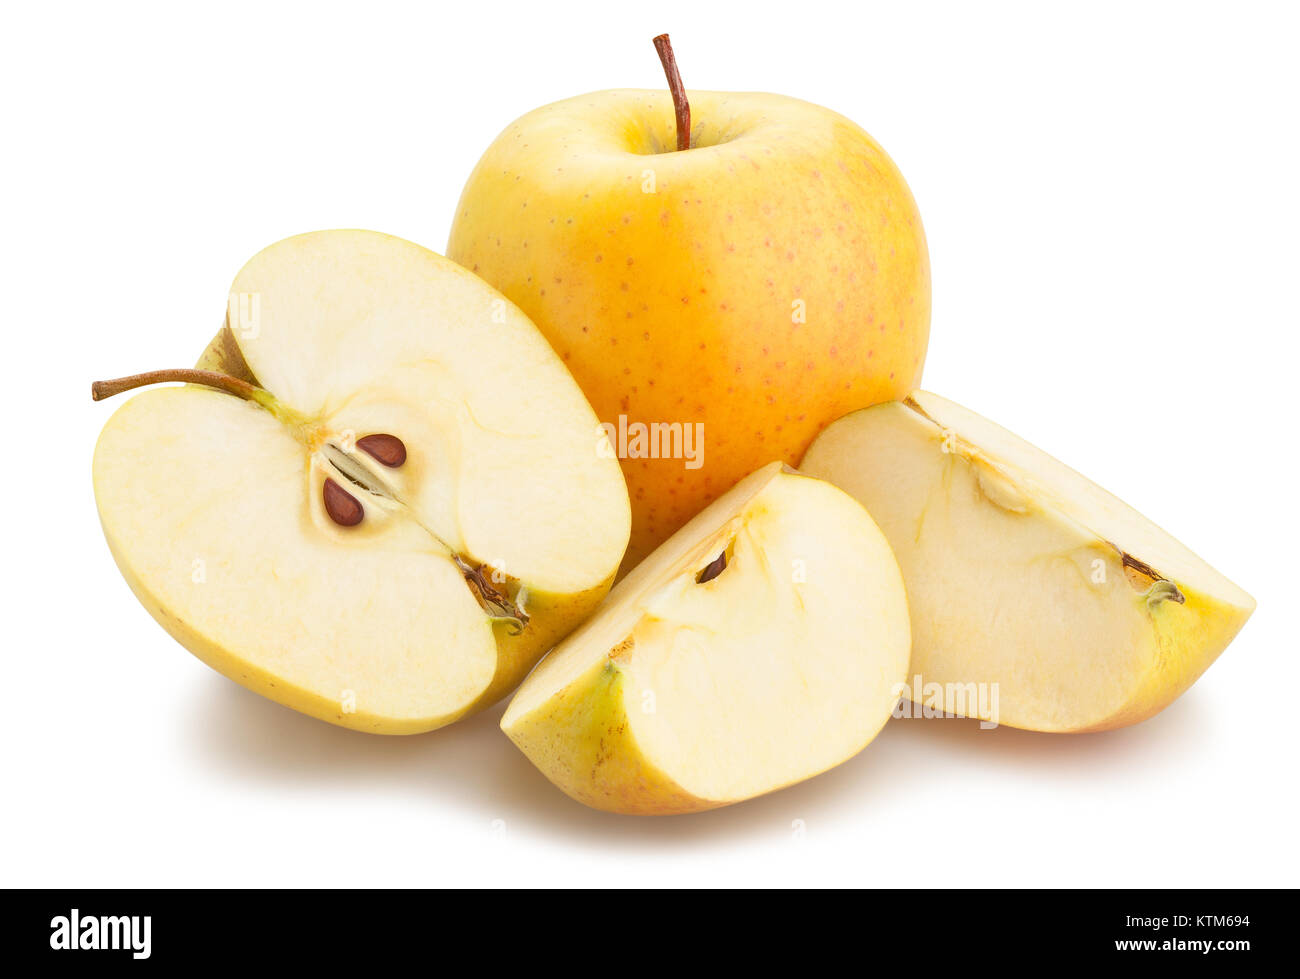 sliced yellow apples path isolated Stock Photo